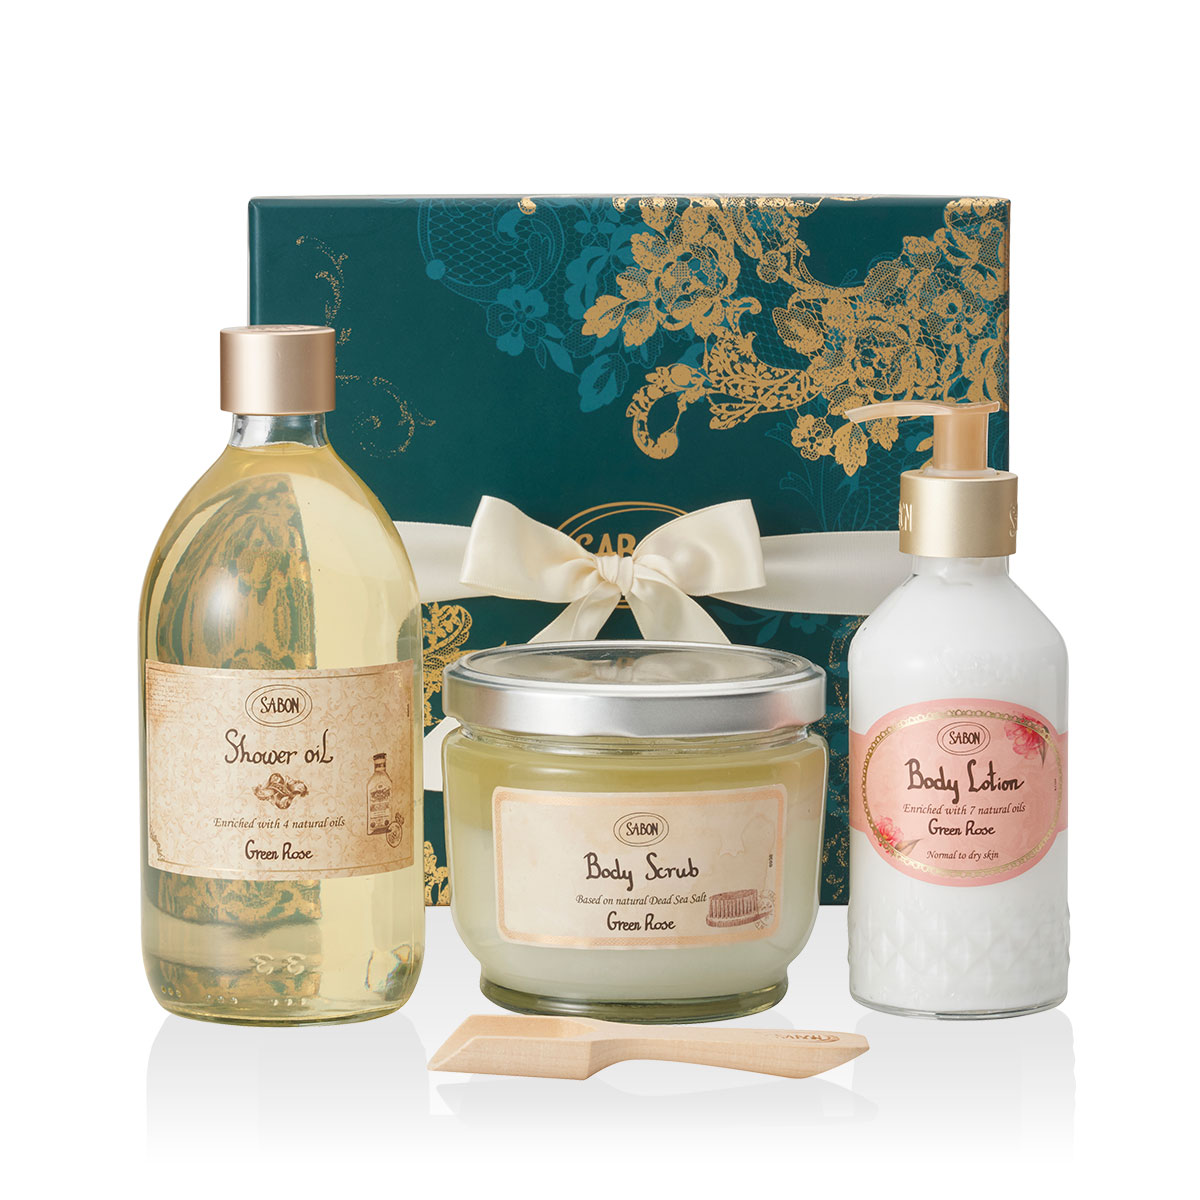 20％OFF対象】サボン SABON ギフトセット バスボール シャワーオイルS